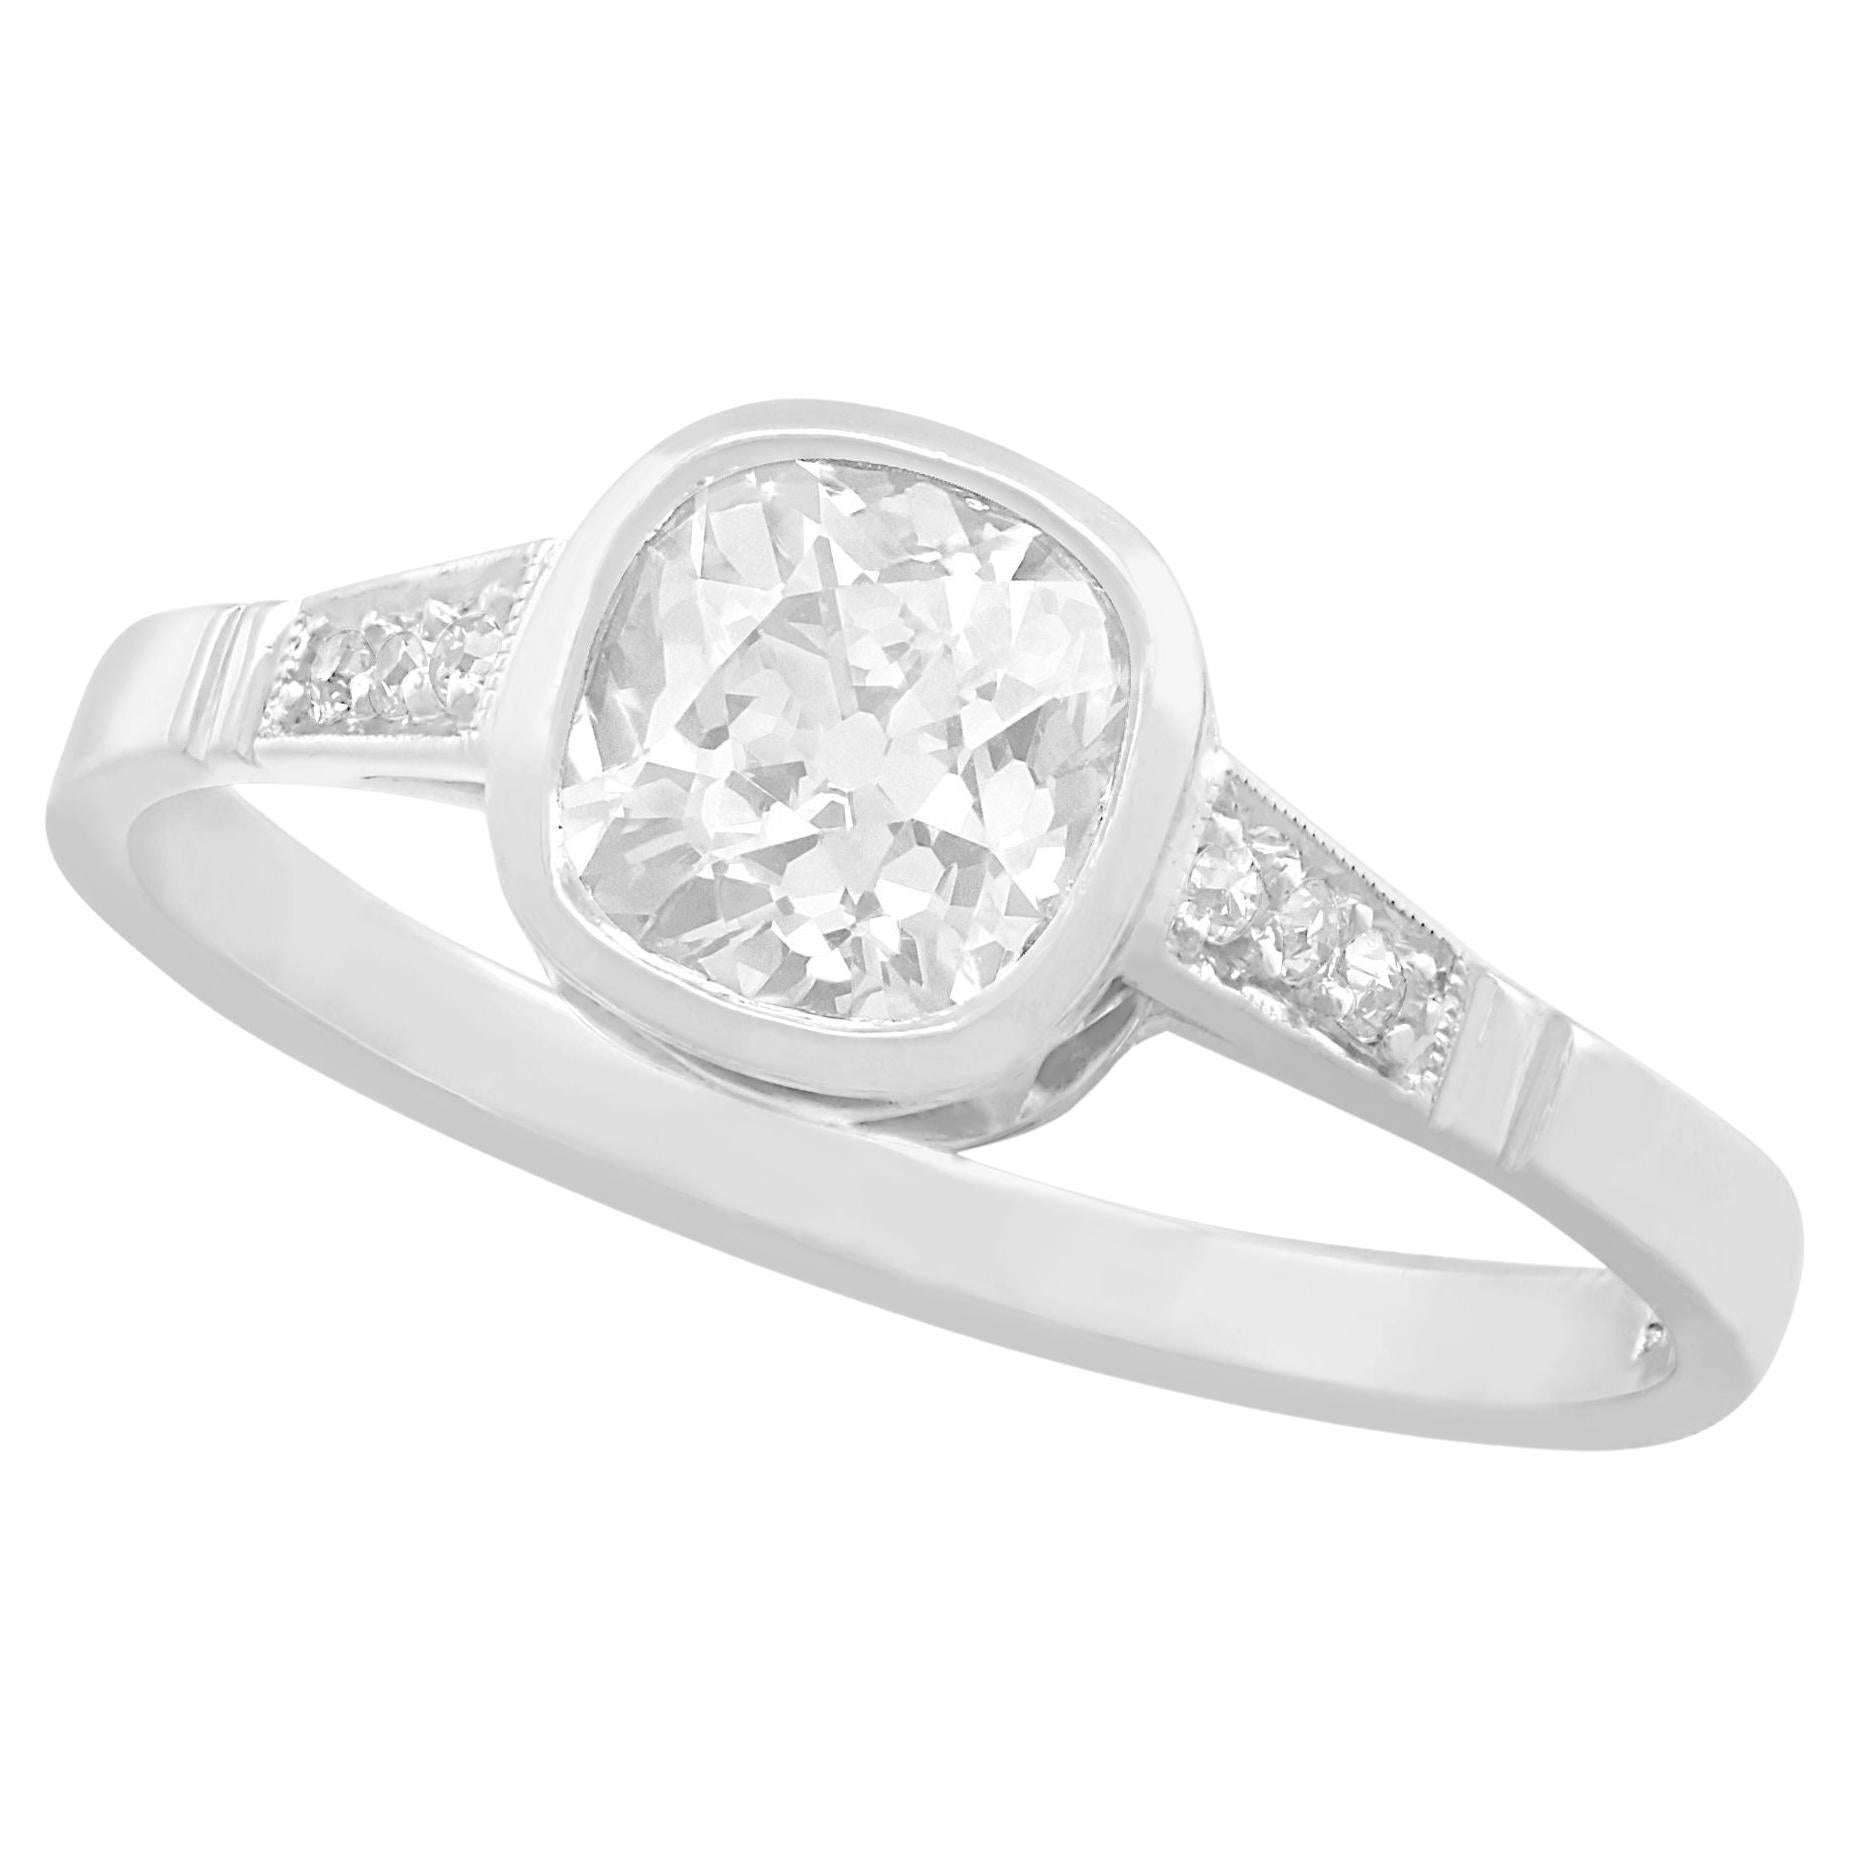 Antique 1.07 Carat Diamond and White Gold Solitaire Ring